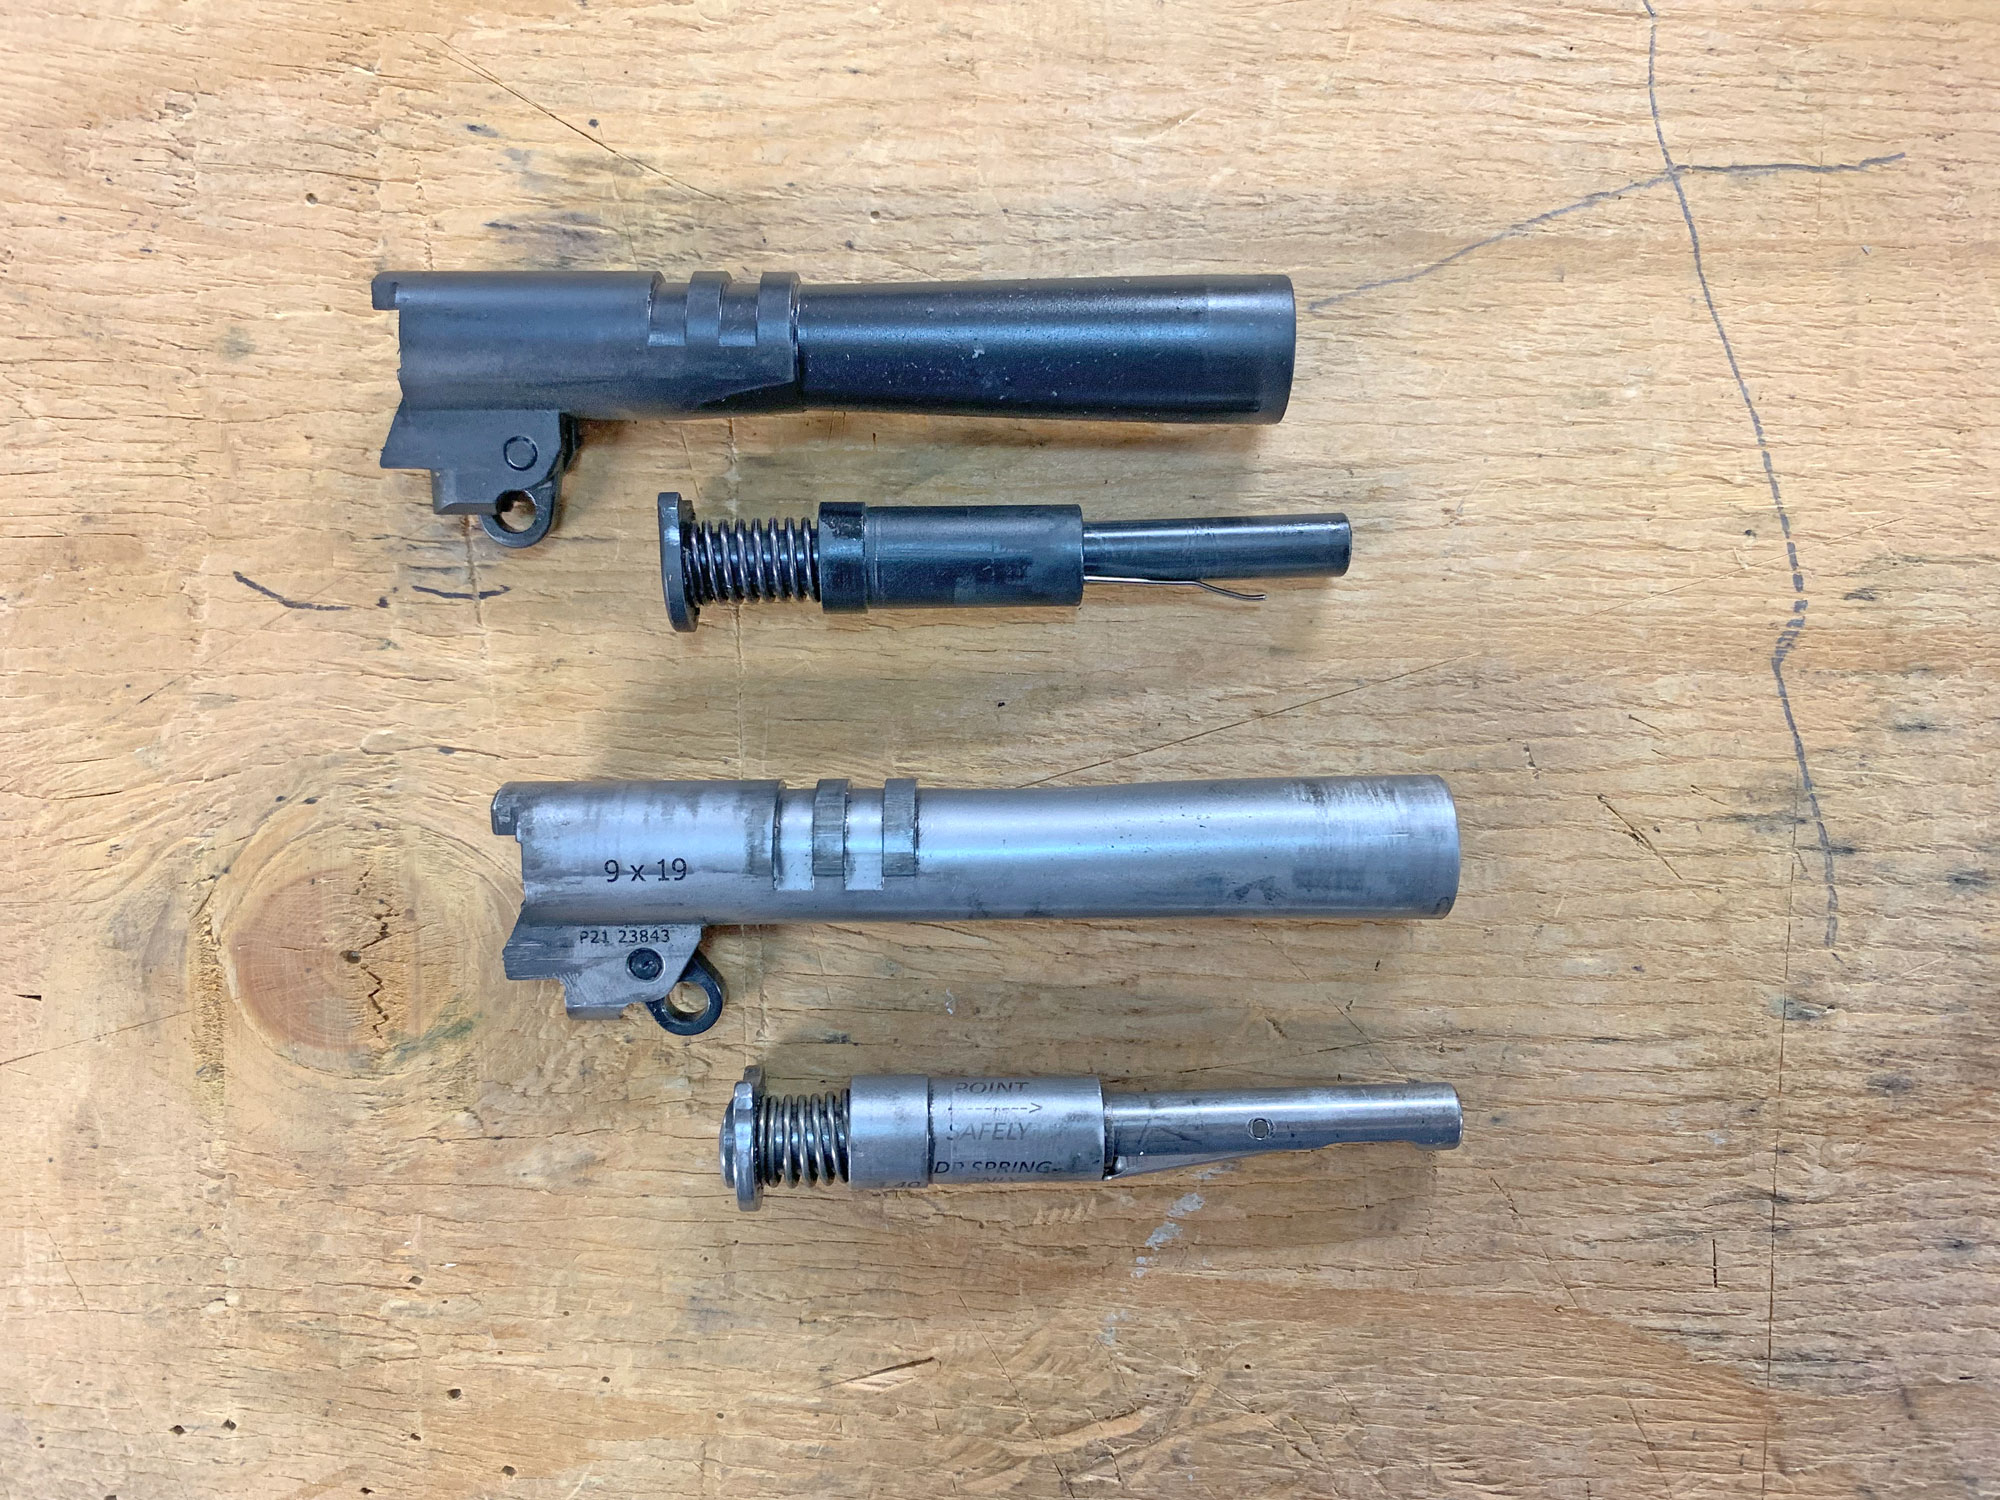 MAC 9 DS barrel and recoil assembly vs Staccato P